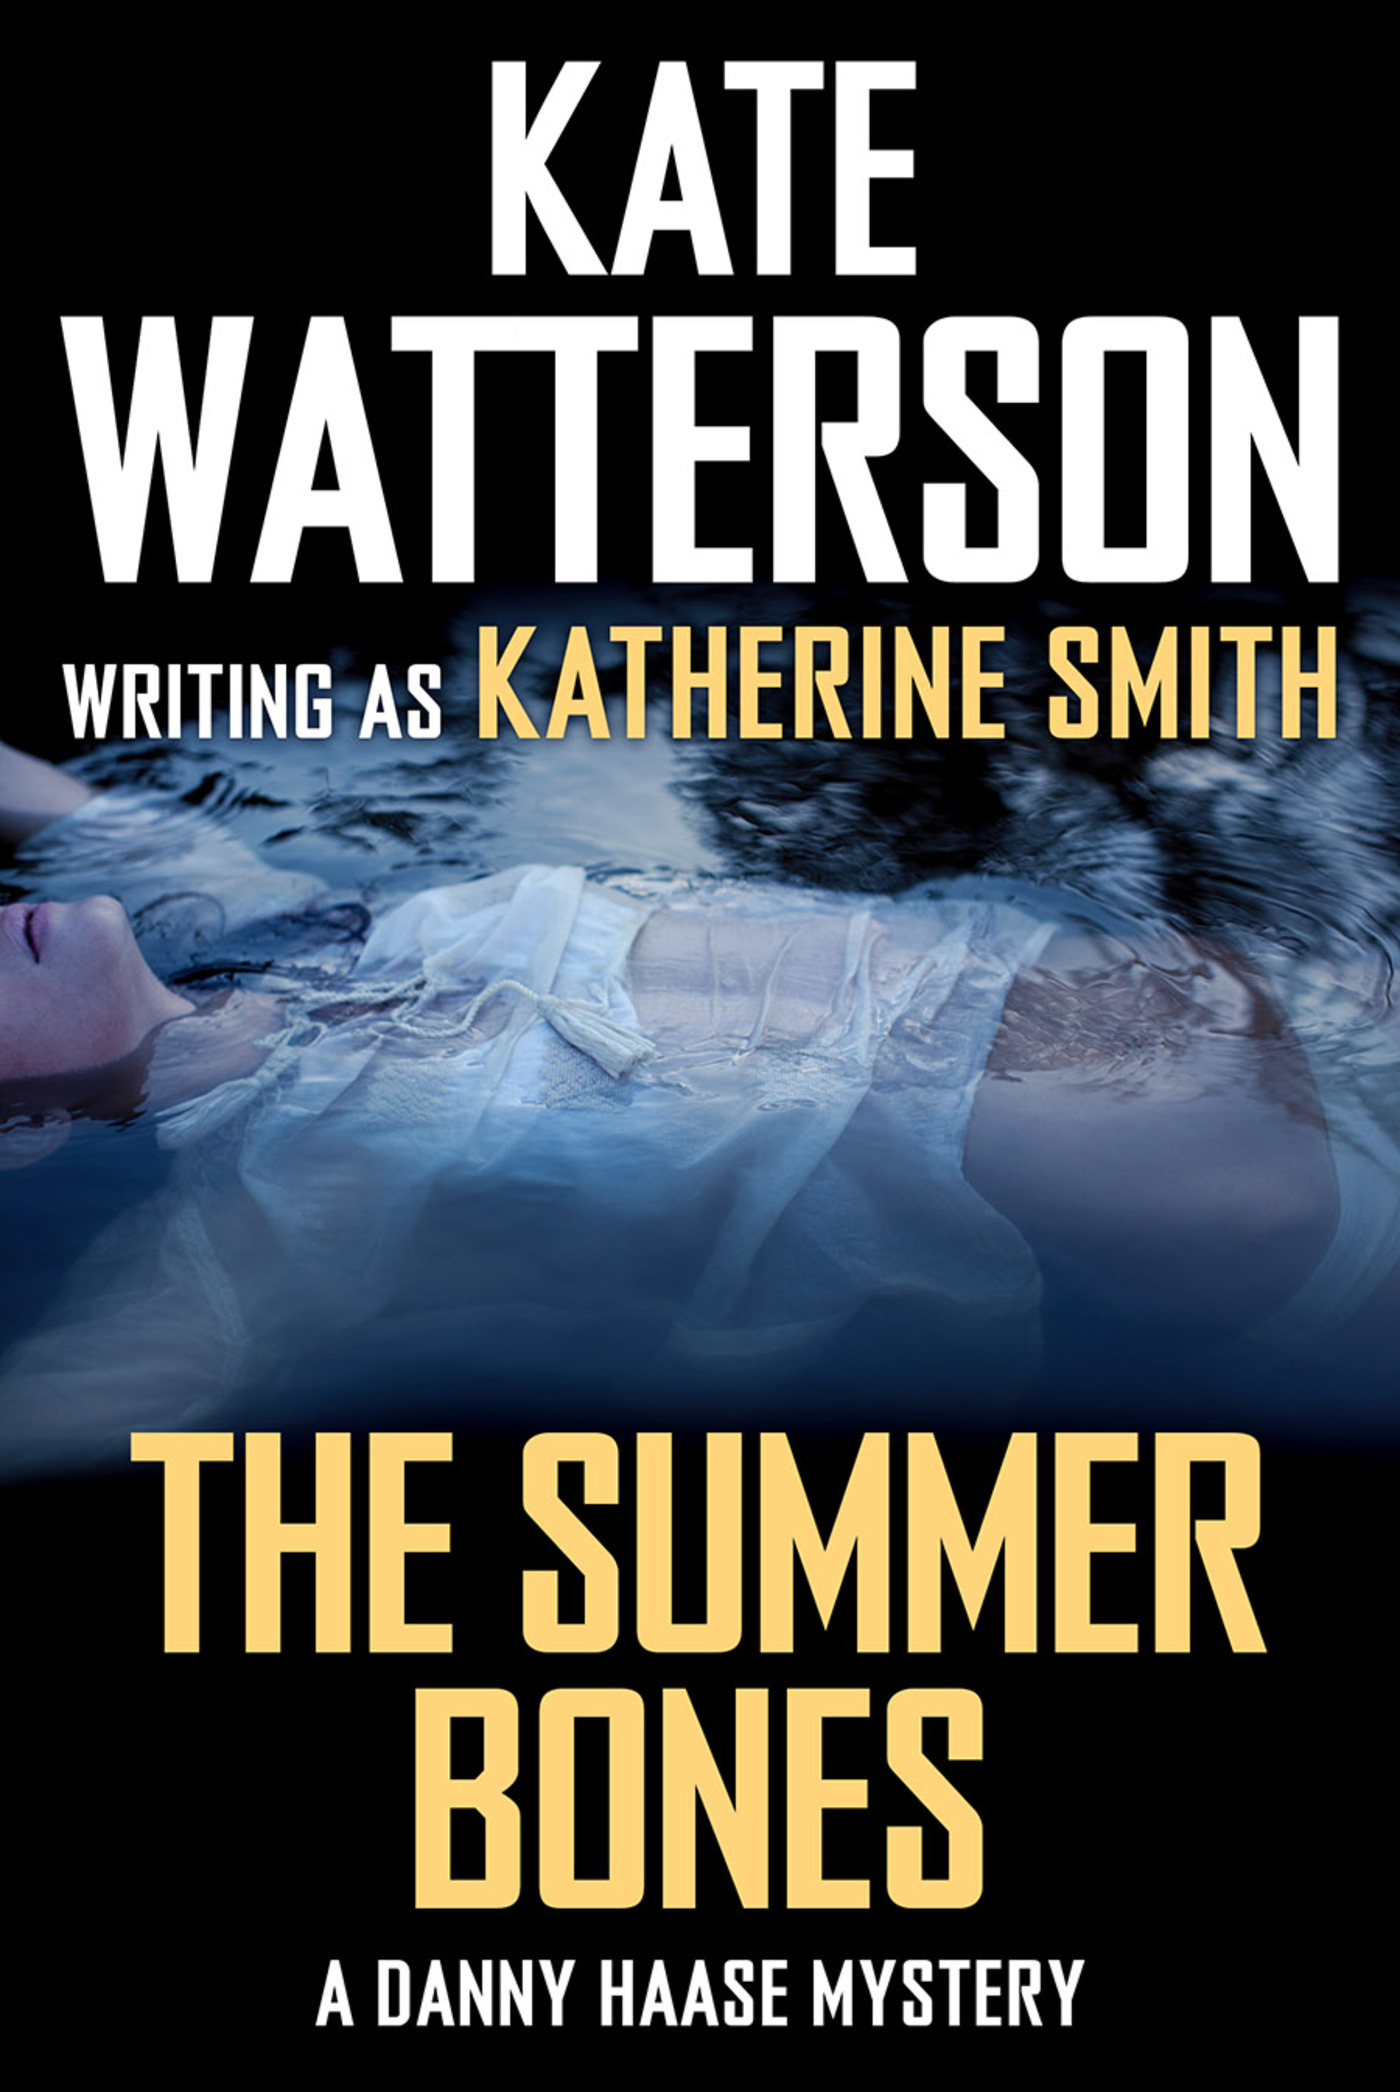 The Summer Bones : A Danny Haase Mystery by Kate Watterson